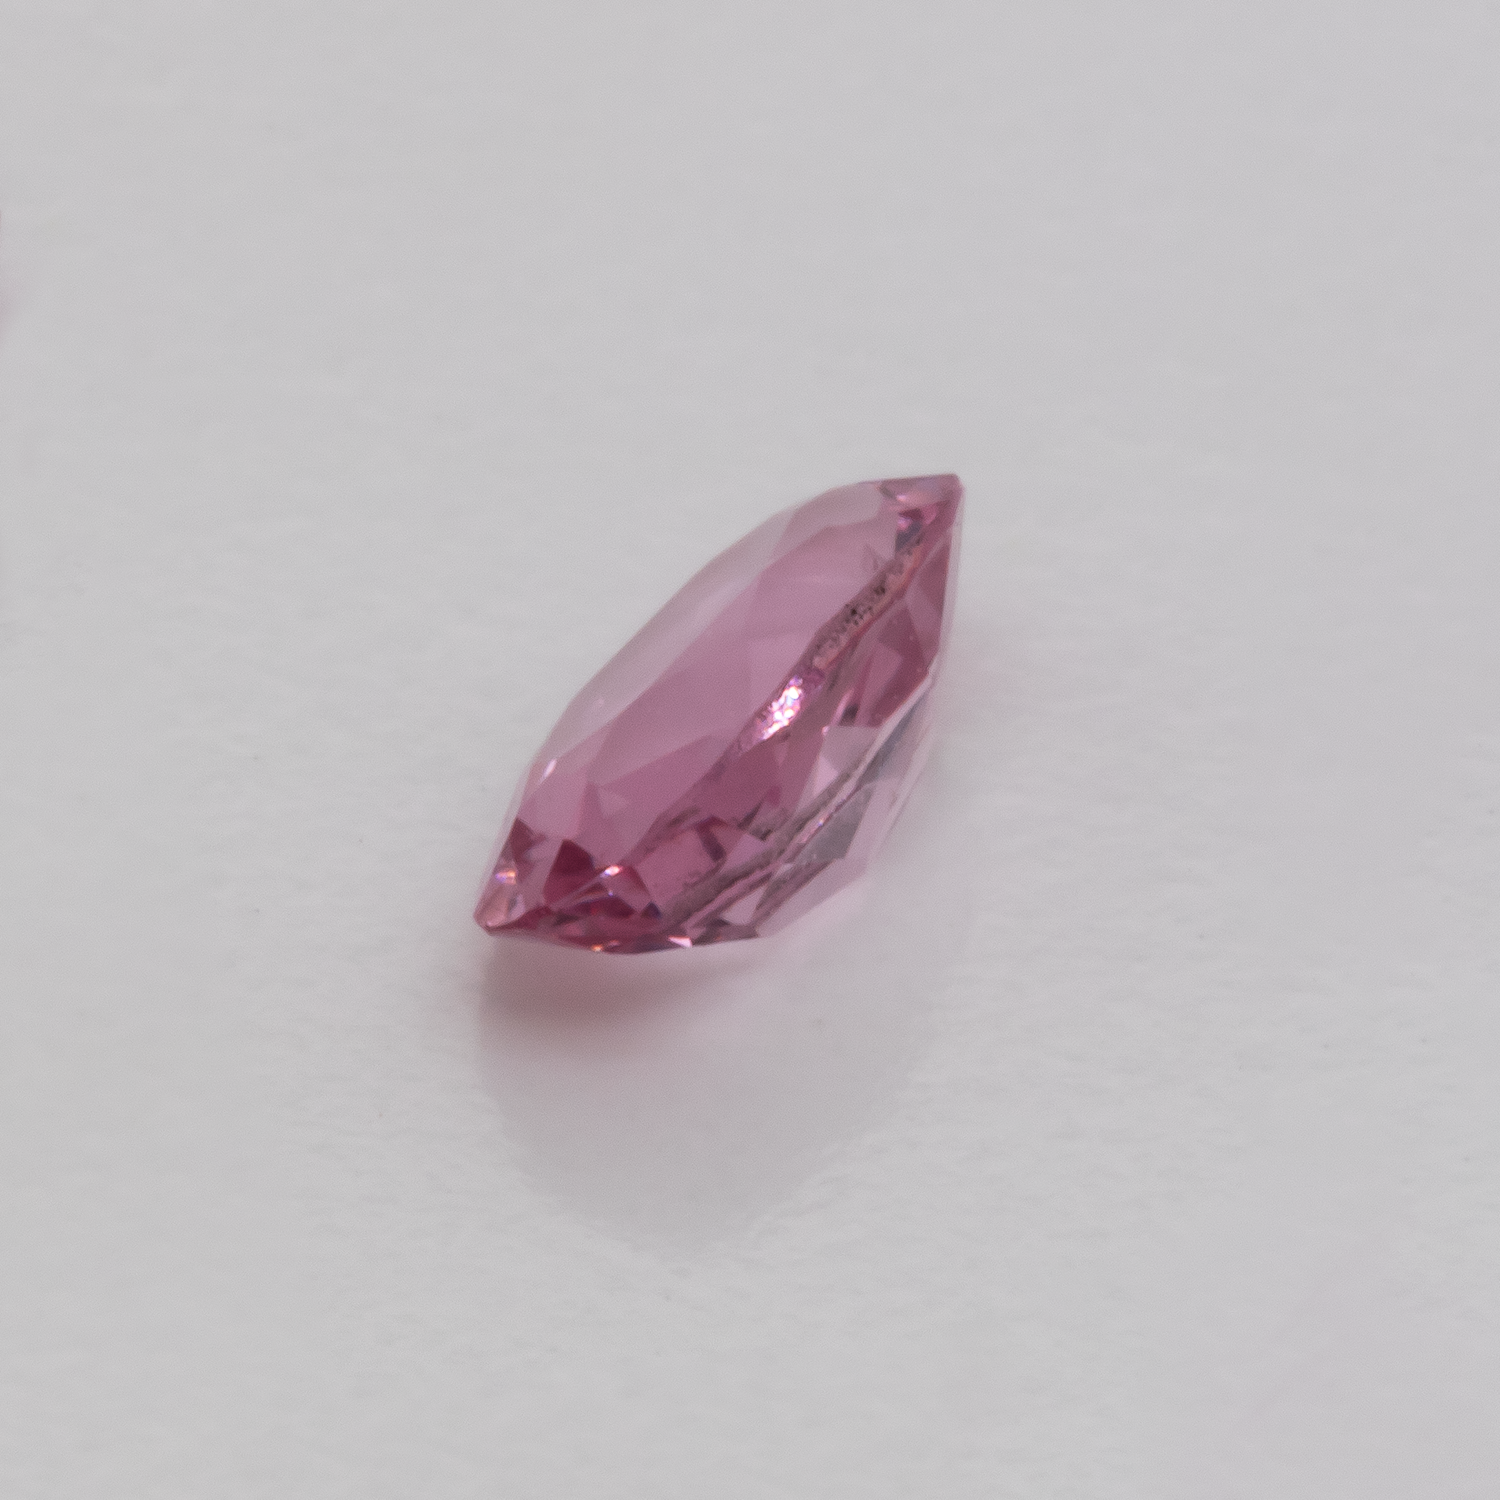 Spinel - pink, oval, 5x3 mm, 0,25 cts, No. SP90024